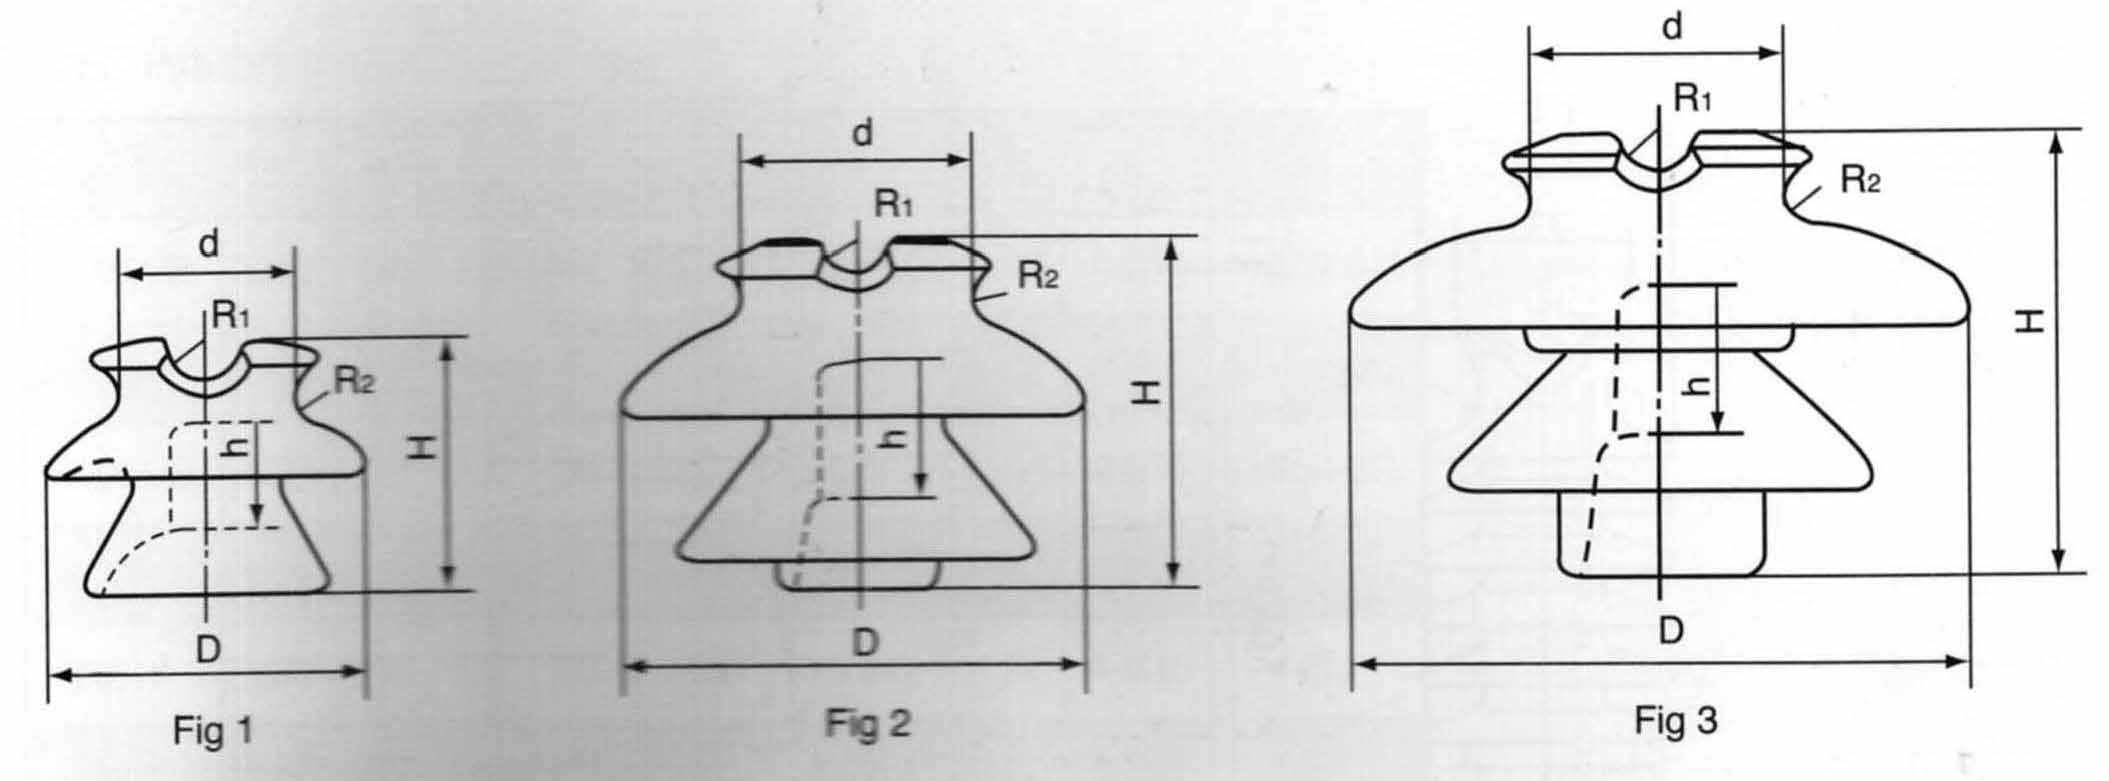 Pin Type Insulators airson bholtaids àrd AS 02 图片 1.png